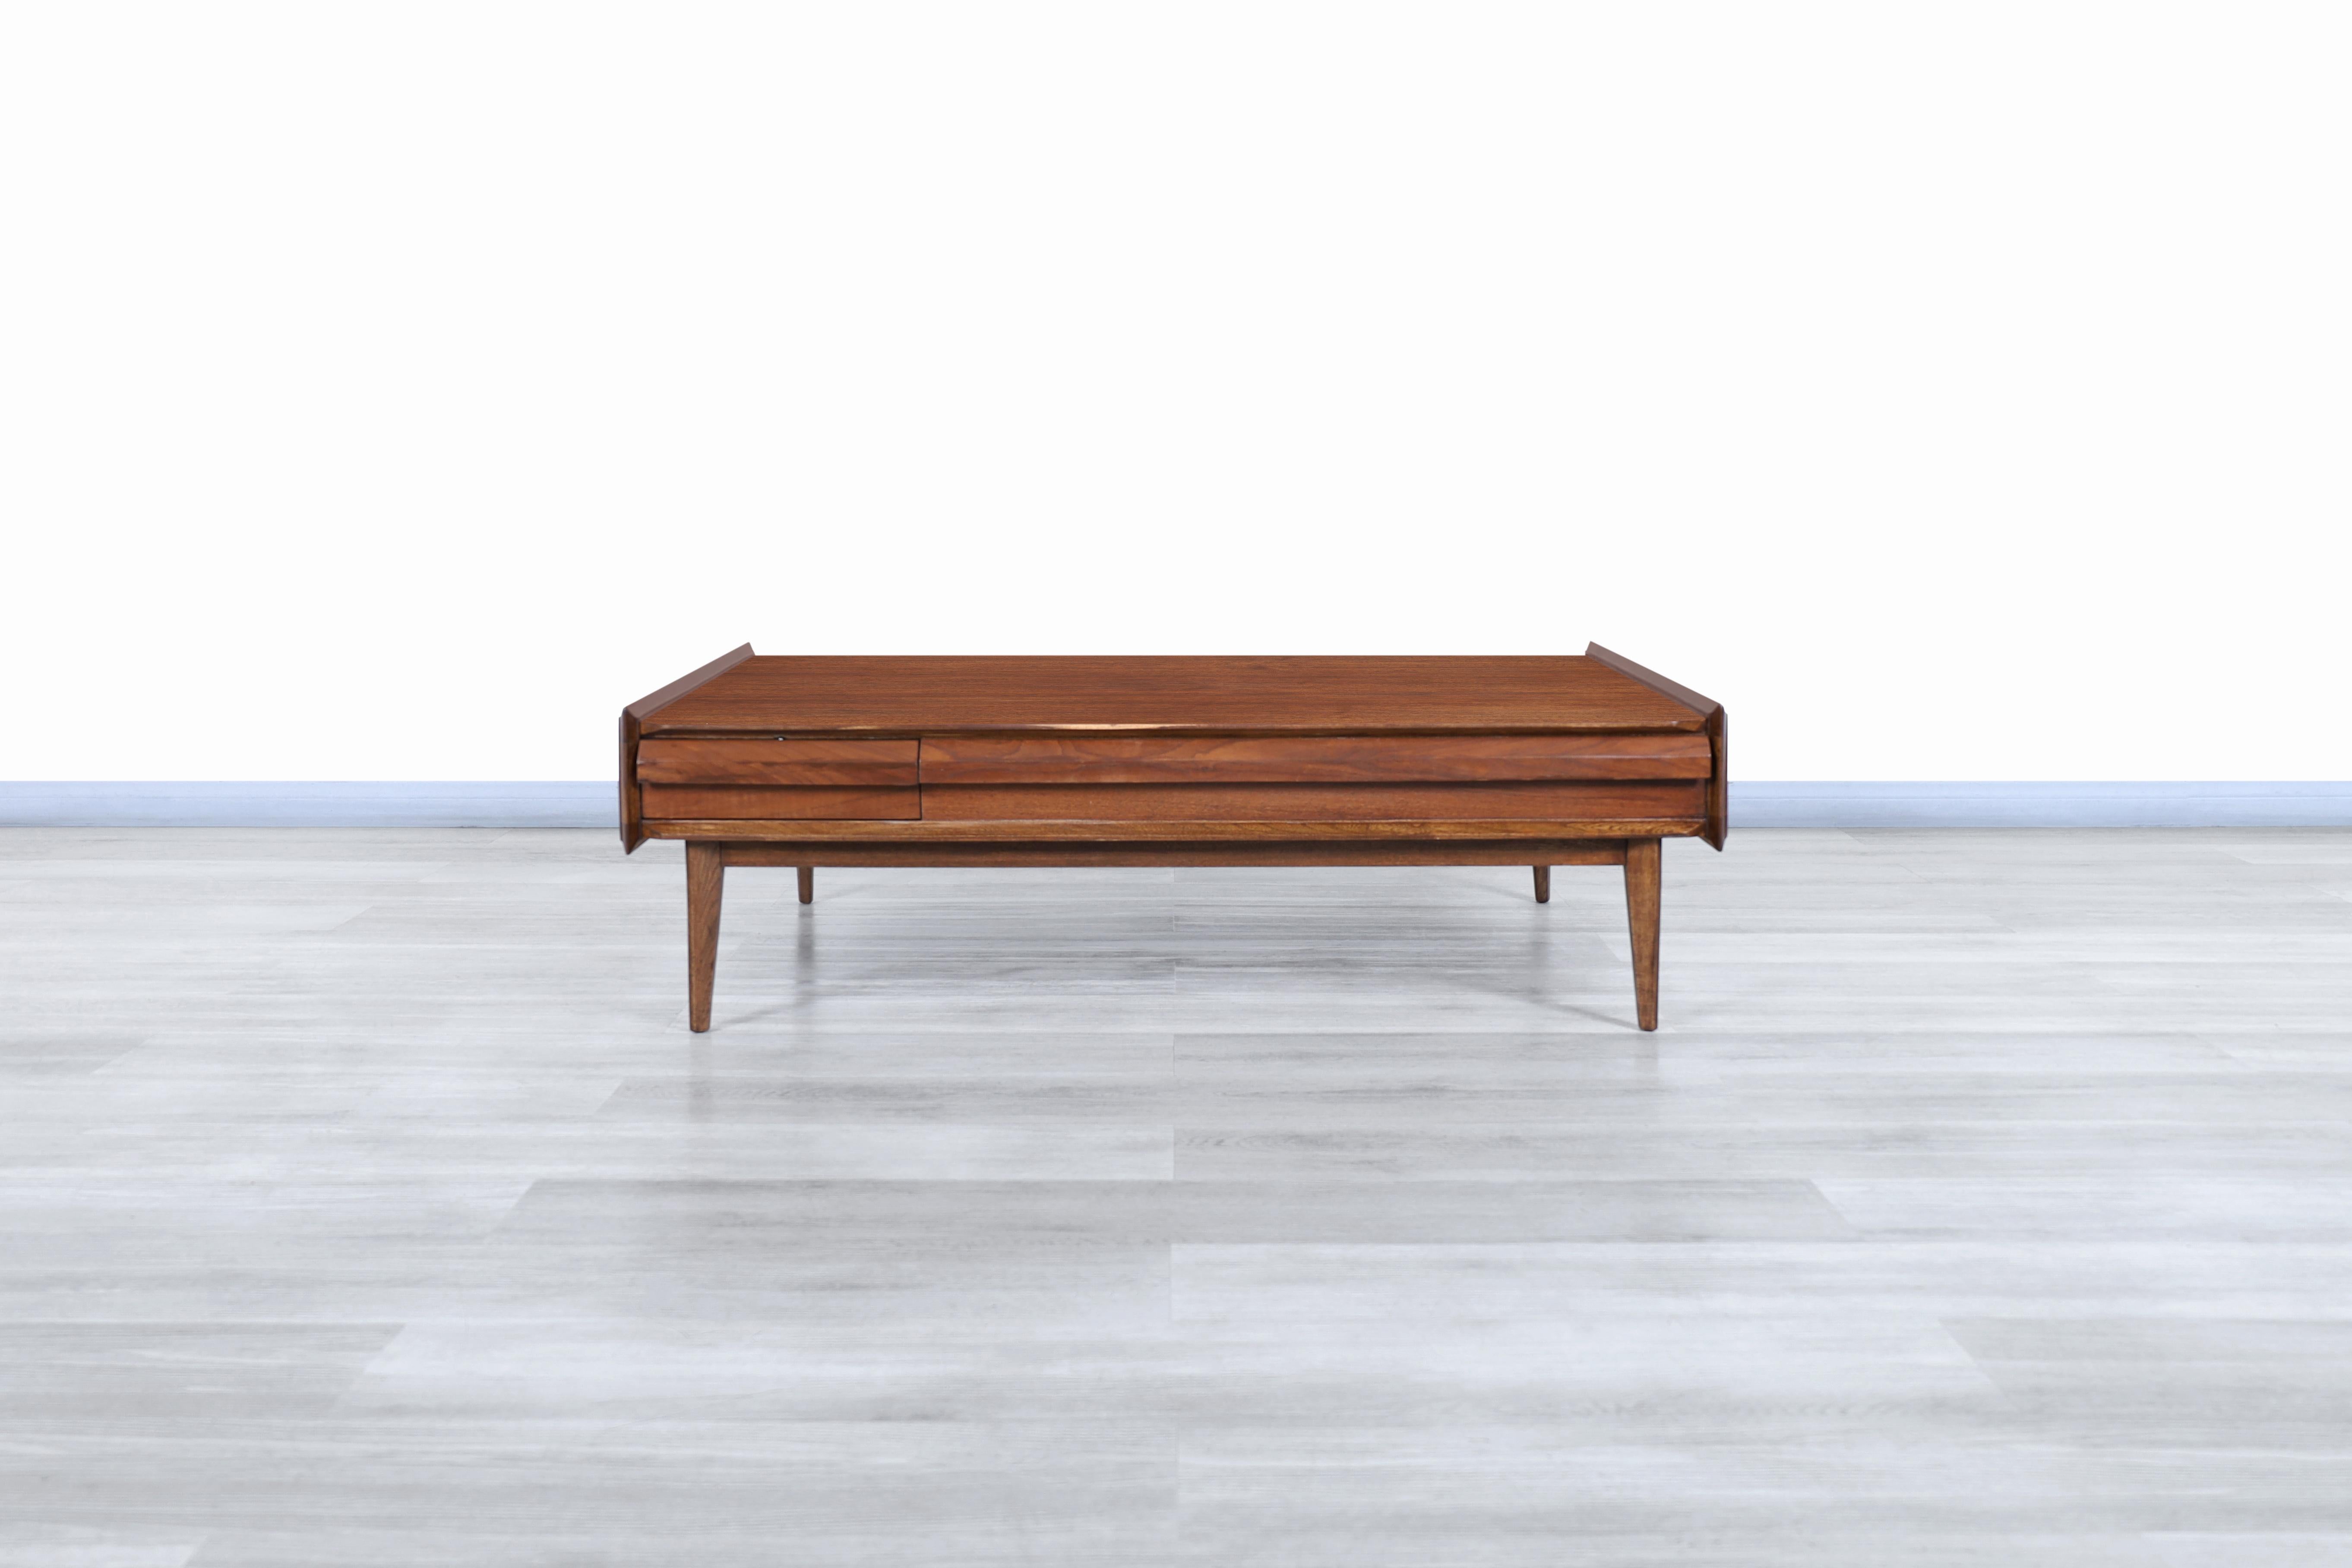 Fabulous Mid-Century Modern “First Edition” walnut coffee table designed and manufactured by Lane Furniture Altavista in the United States, circa 1960s. This table's Minimalist design stands out for its functionality and particular size. It features